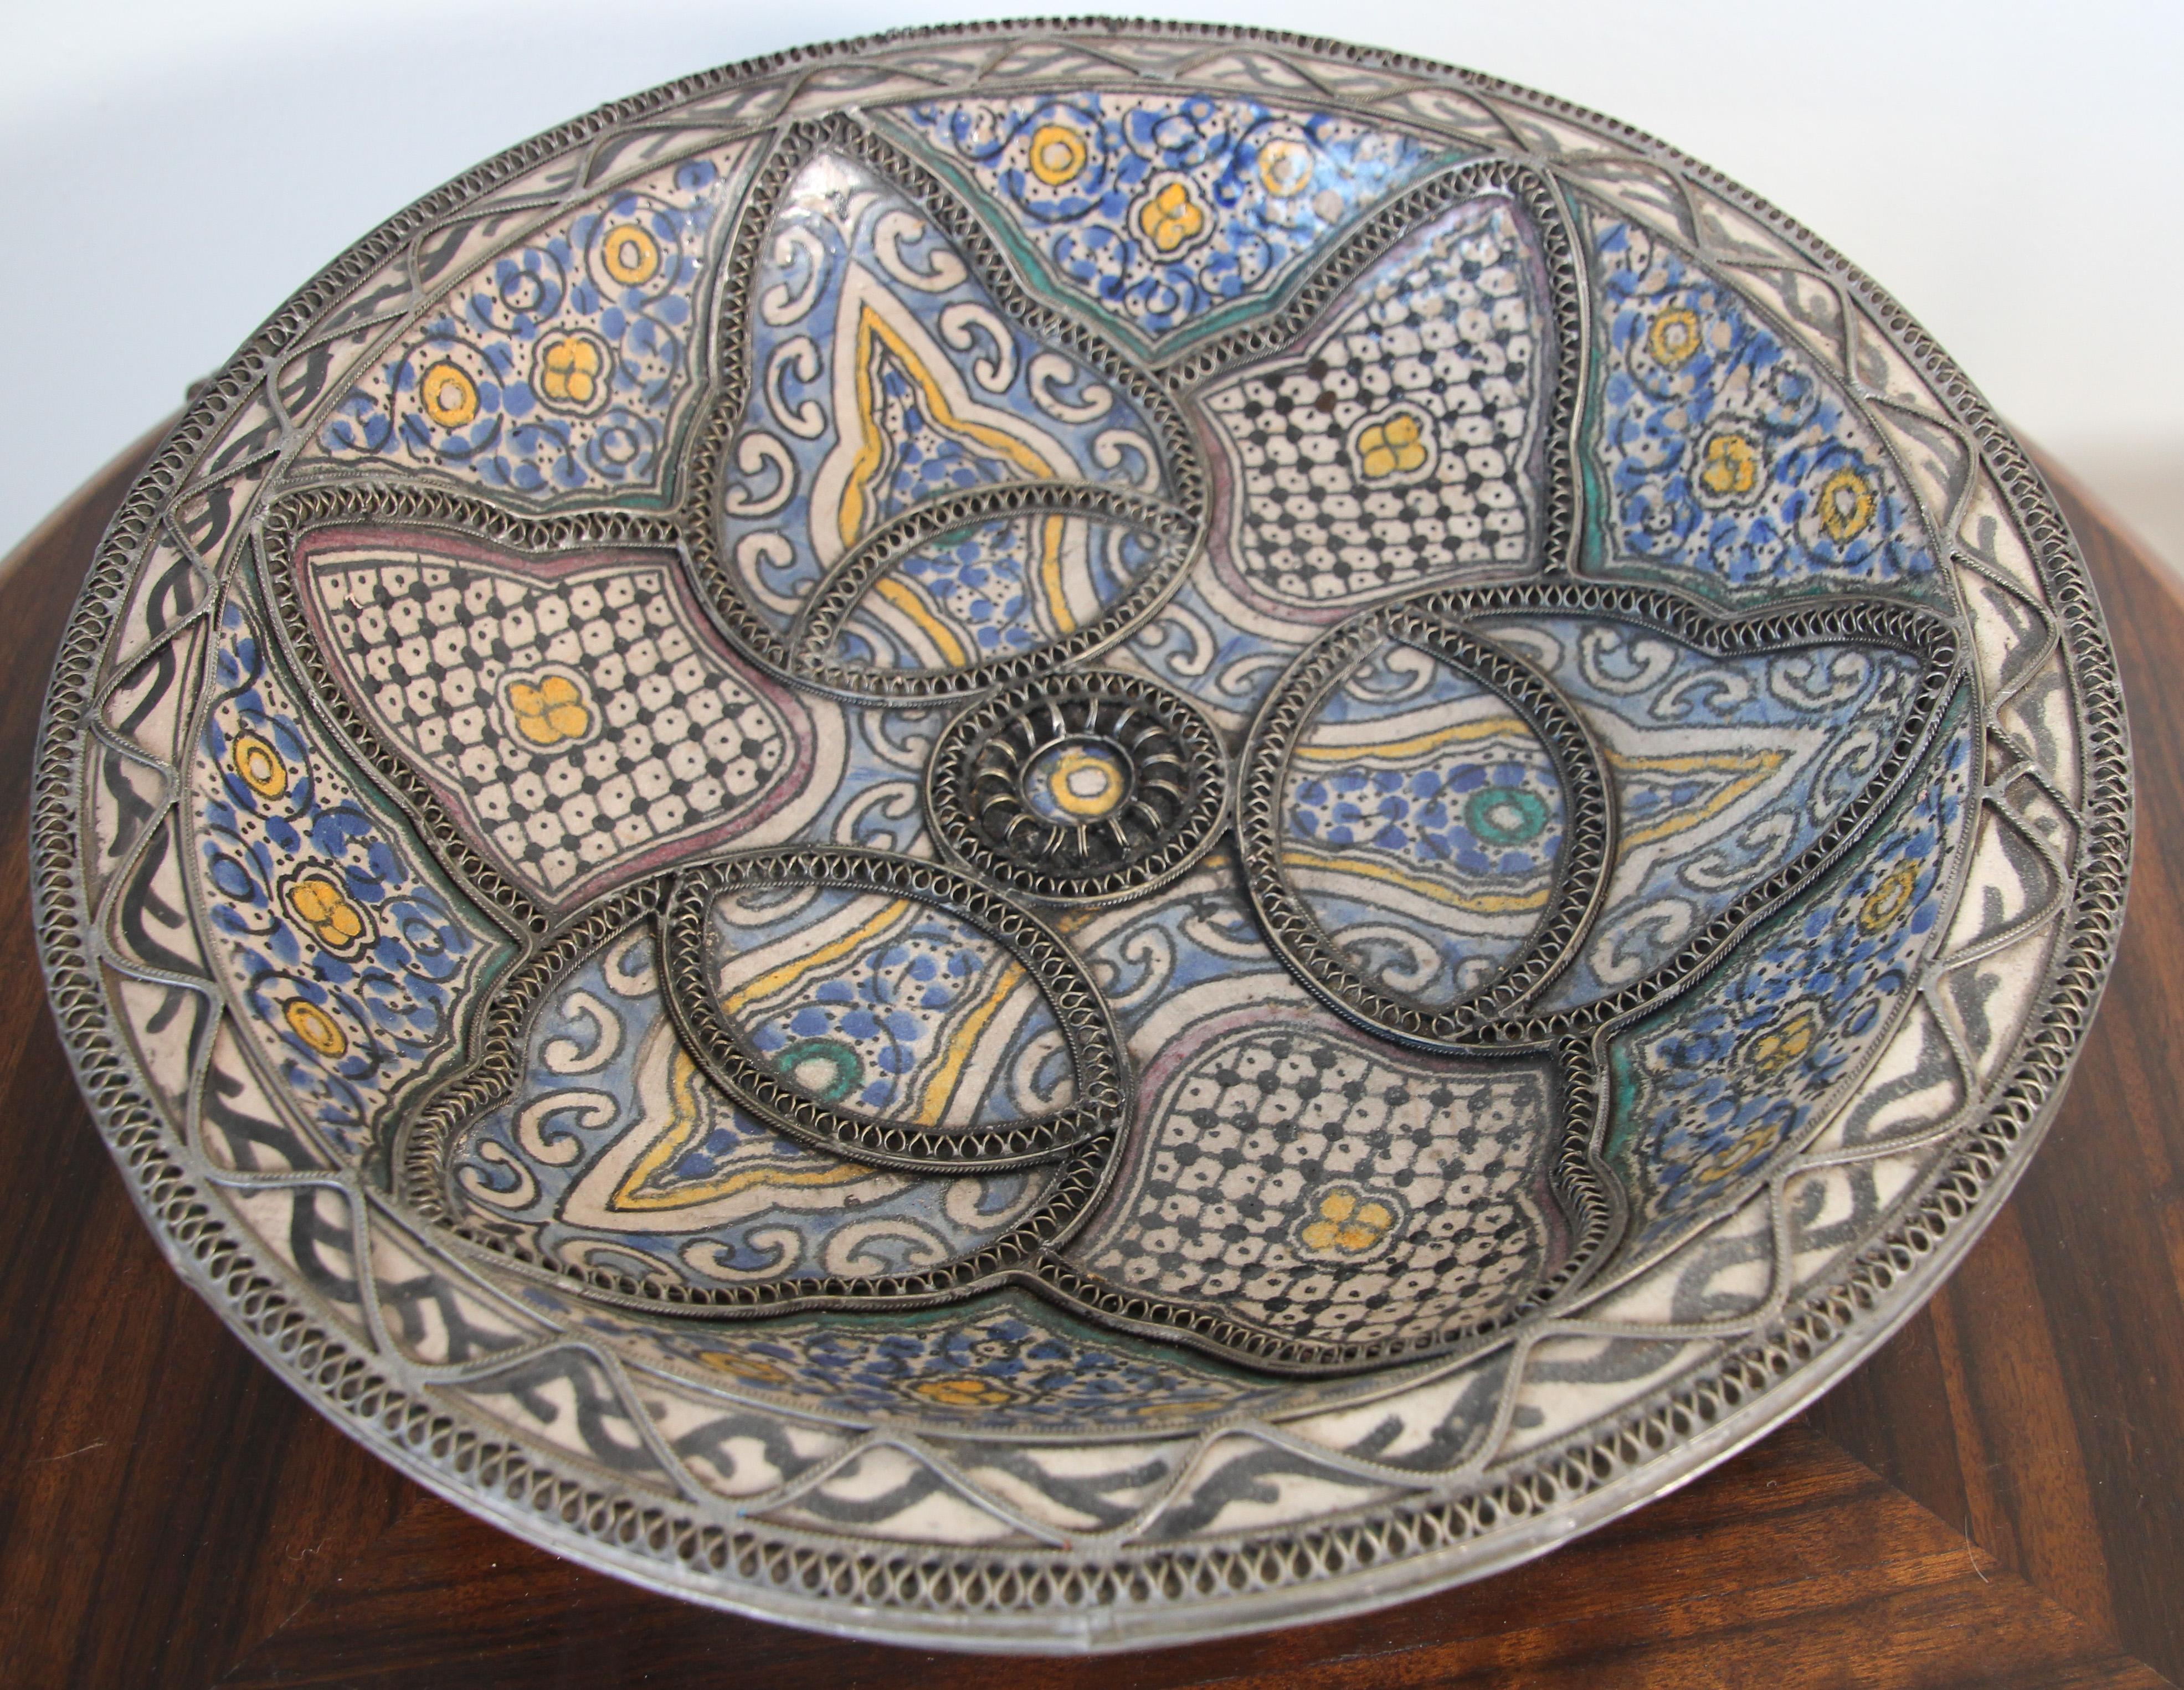 Handcrafted large Moroccan Moorish polychrome decorative ceramic bowl from Fez. 
Bleu de Fez, very nice designs hand painted by artist in Fez.
Antique ceramic handcrafted bowl with geometrical and floral designs in blue and white and polychrome